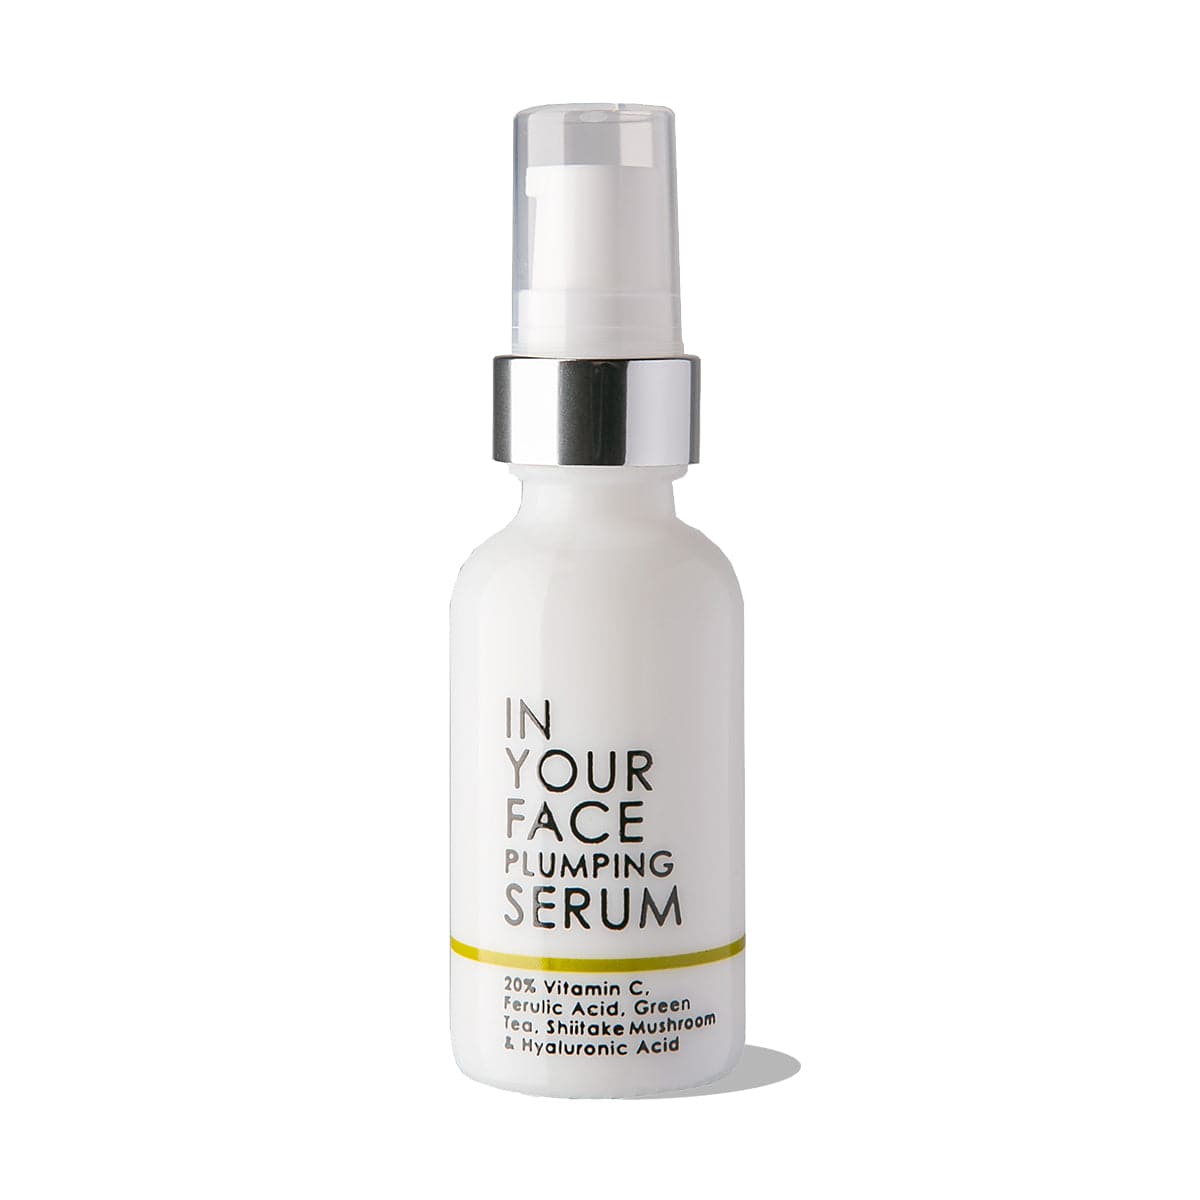 an image of IN YOUR FACE PLUMPING SERUM on a white background